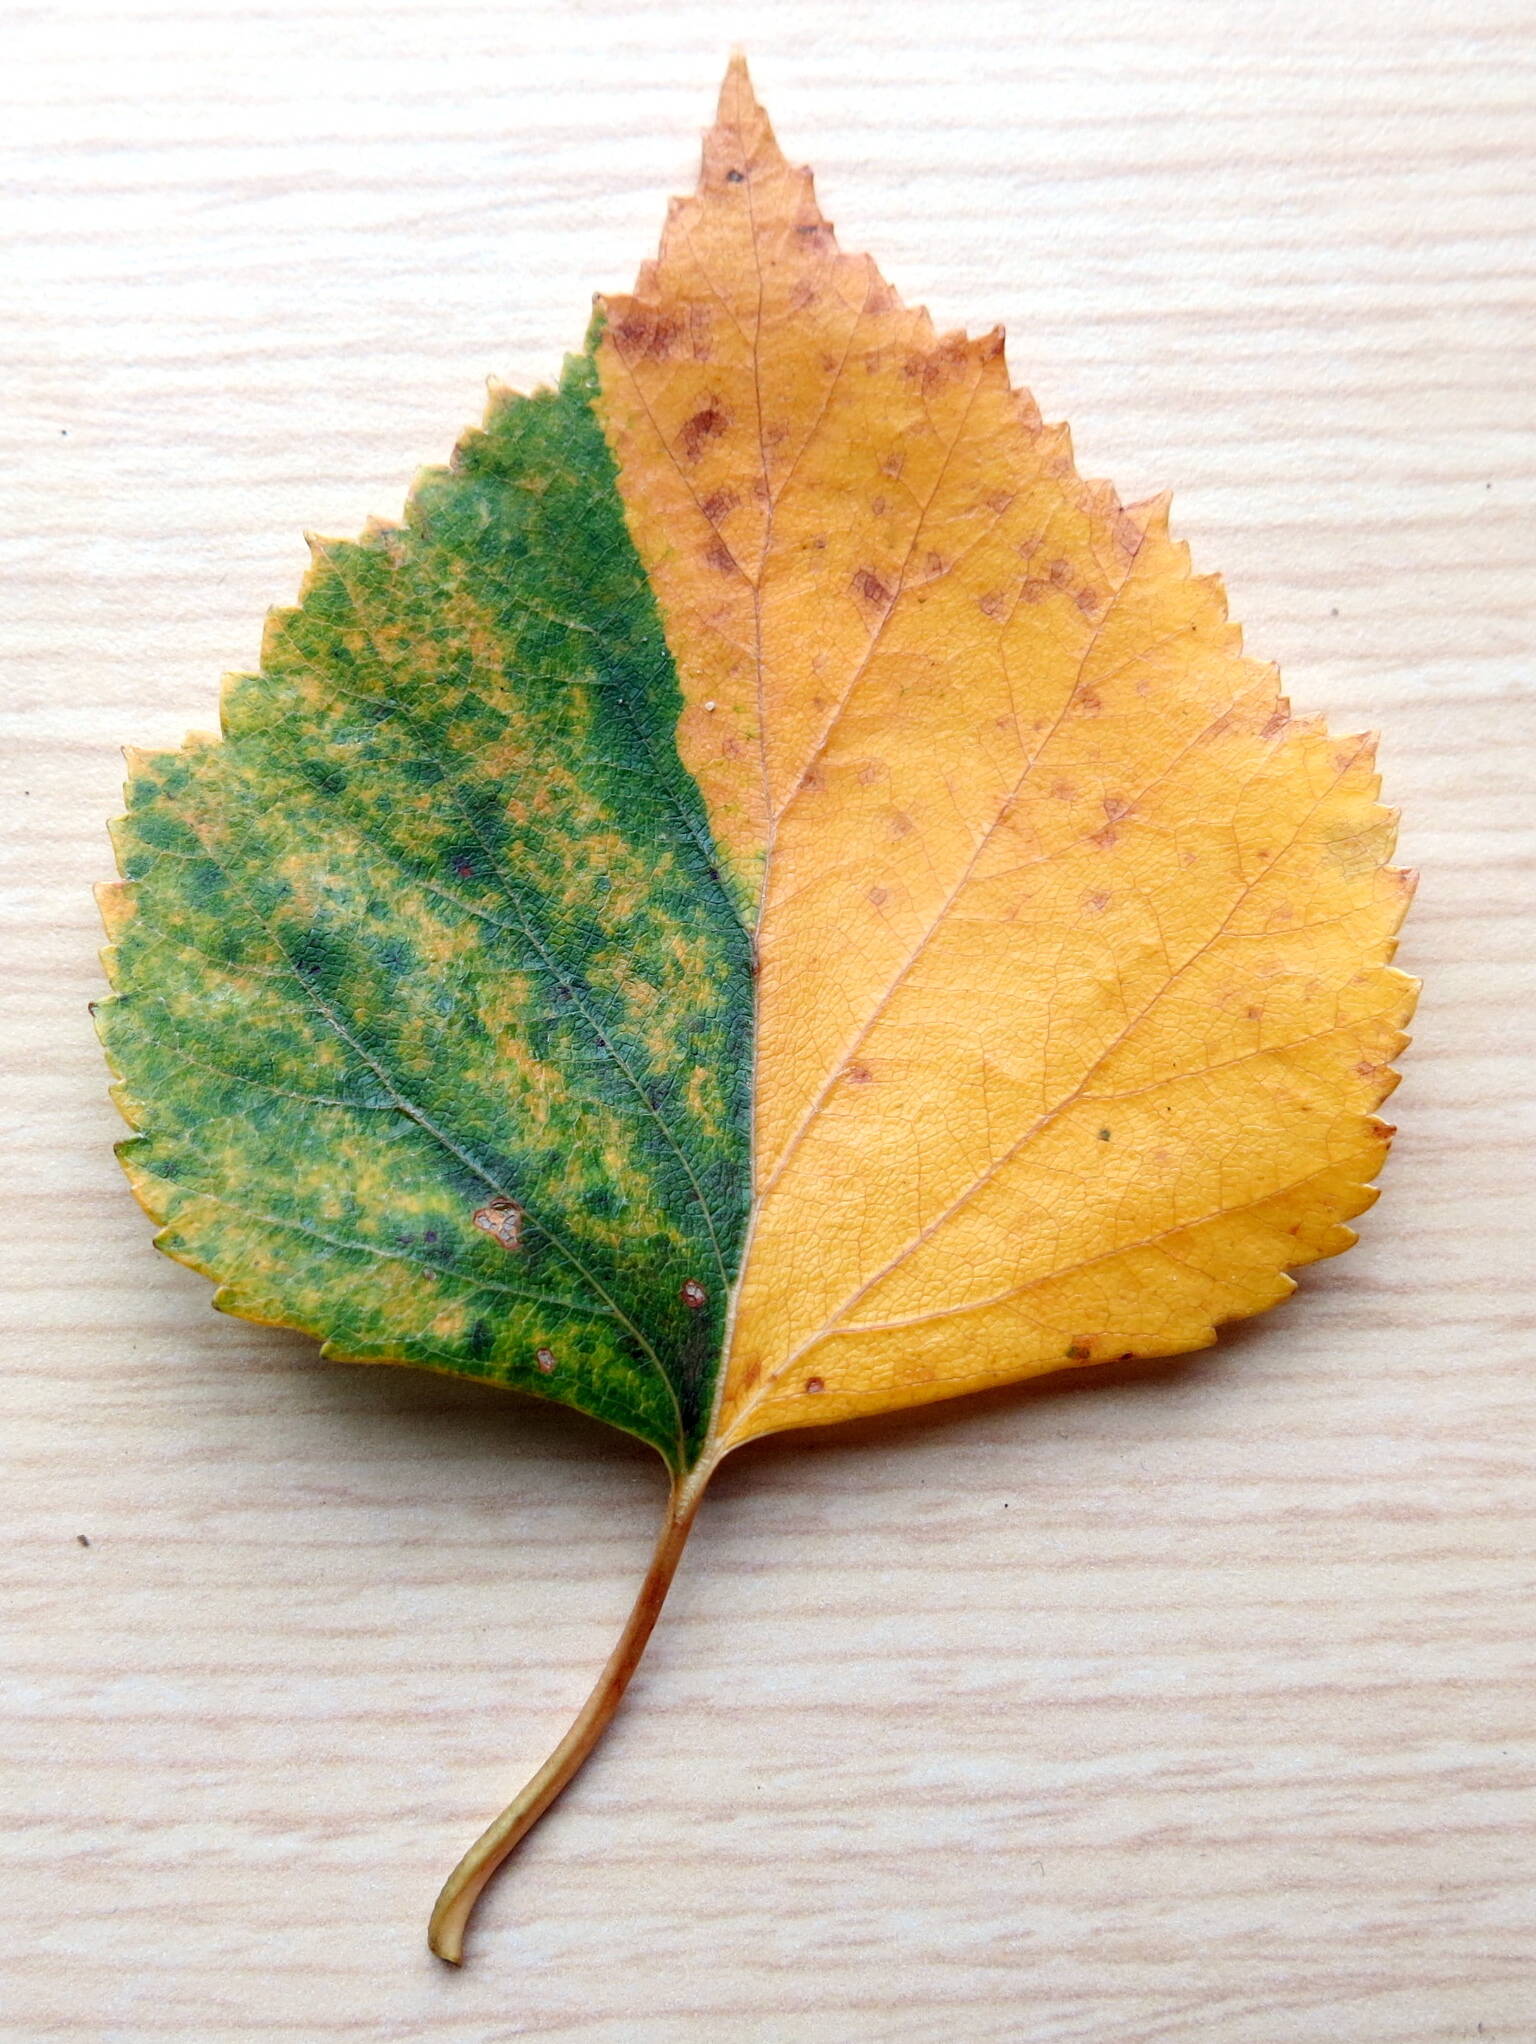 A birch leaf from the UAF campus shows a unique pattern of senescence, where the parent tree stopped flooding the leaves with chlorophyll. (Photo by Ned Rozell)